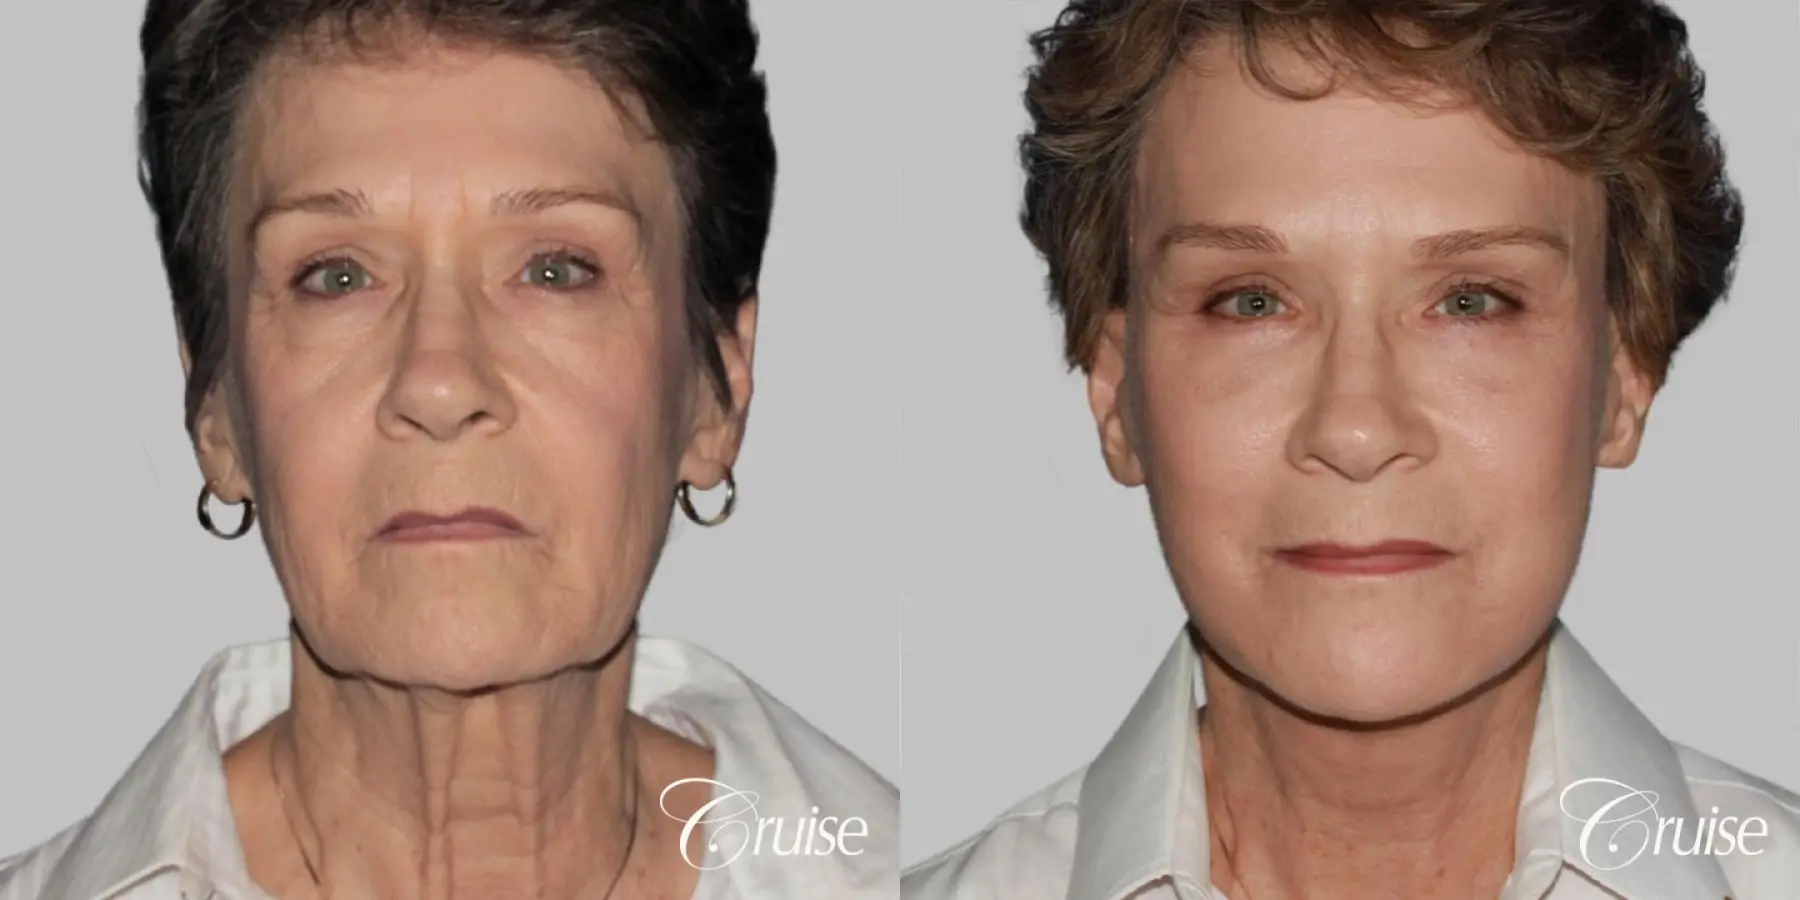 Female Facelift, Blepharoplasty, Necklift, and Temple Lift - Before and After  